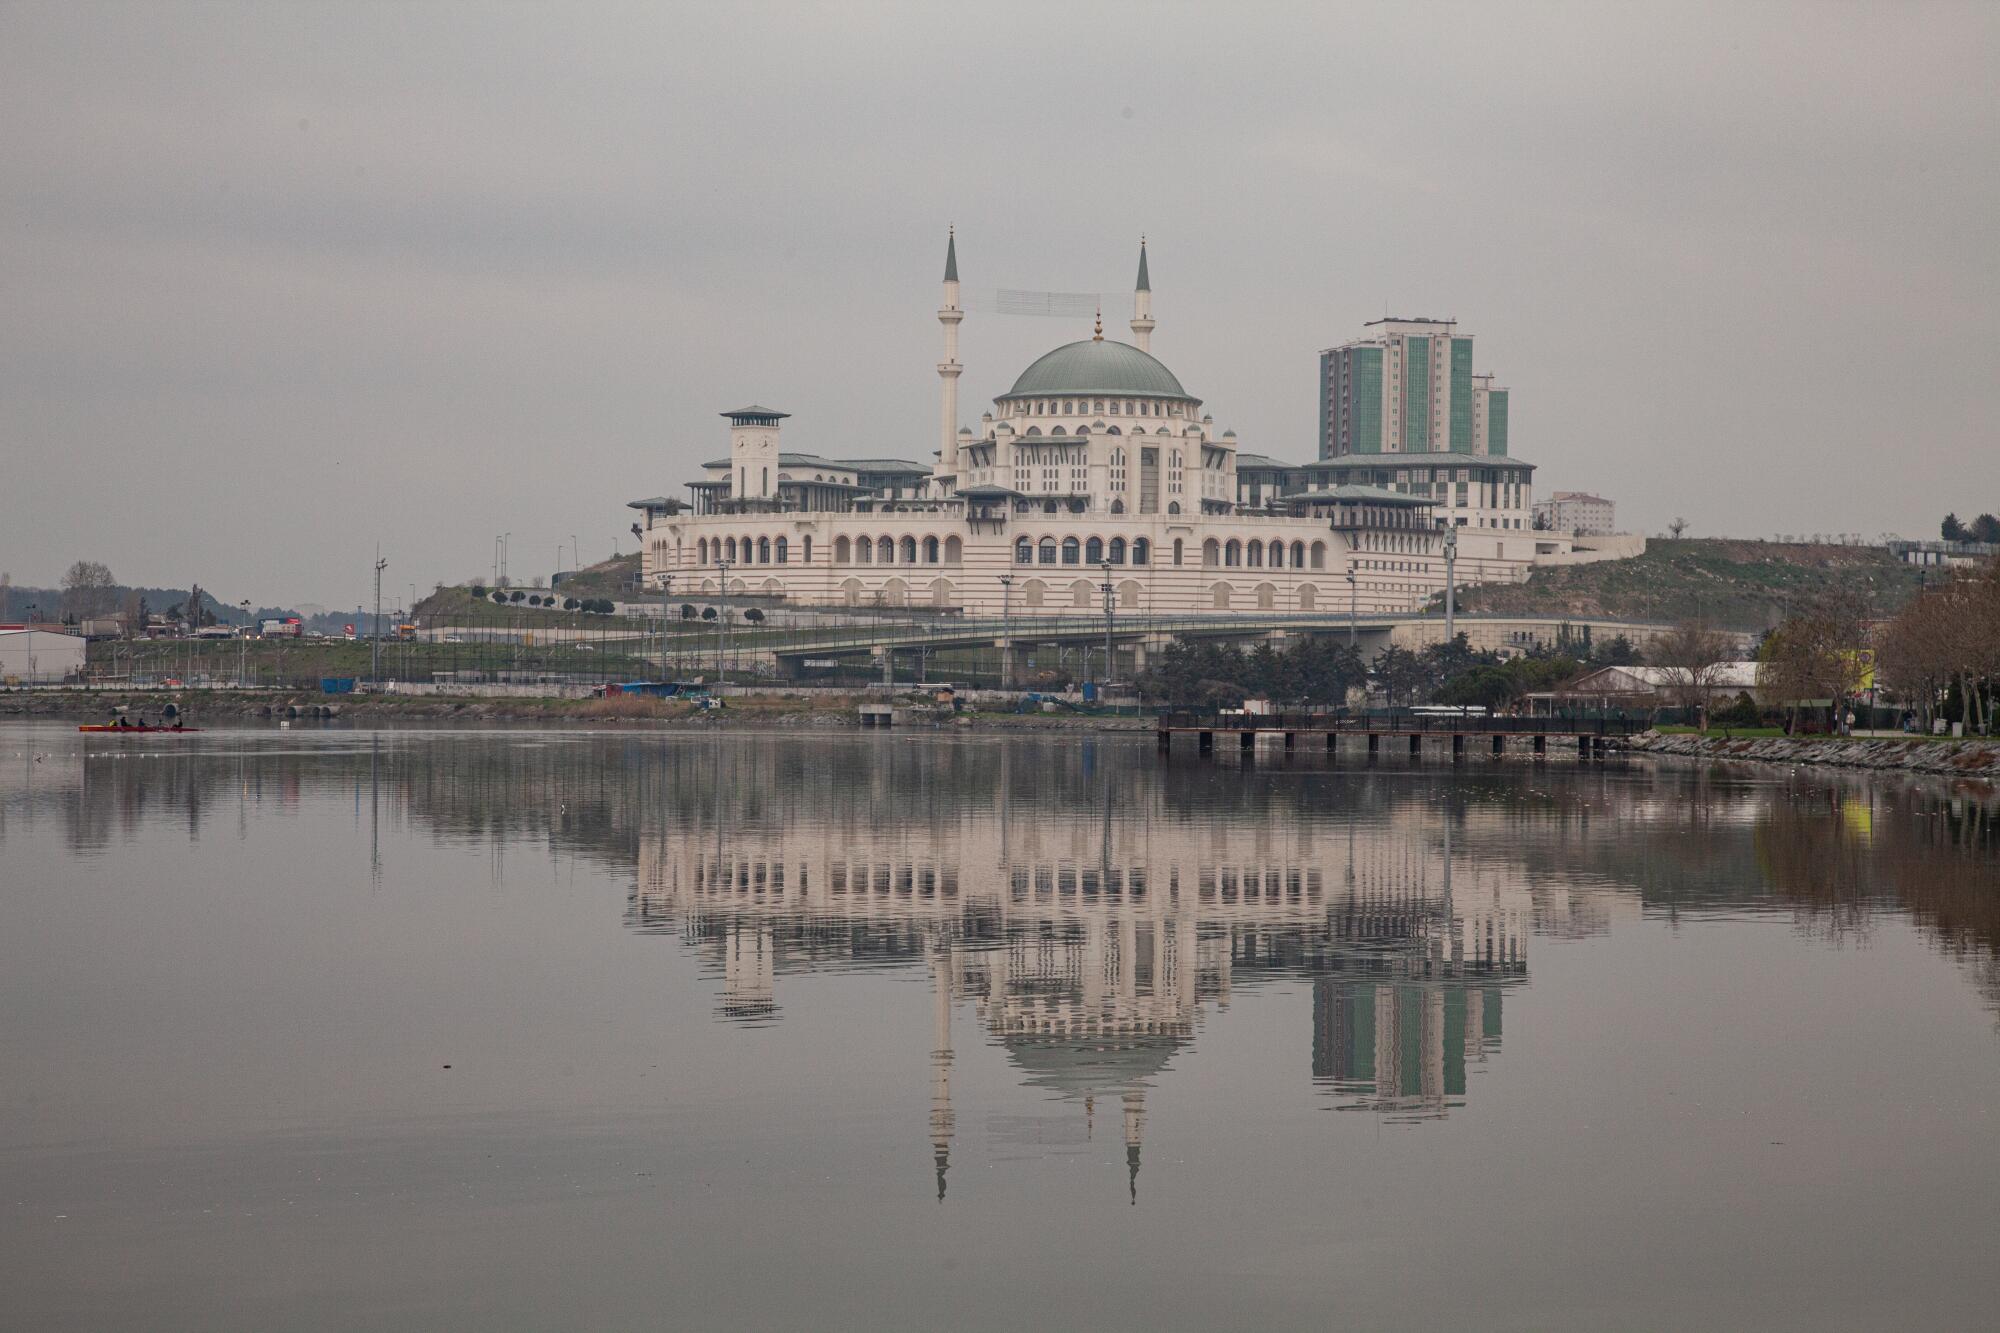 A view of a lake and a sprawling white building with a blue dome and minarets 